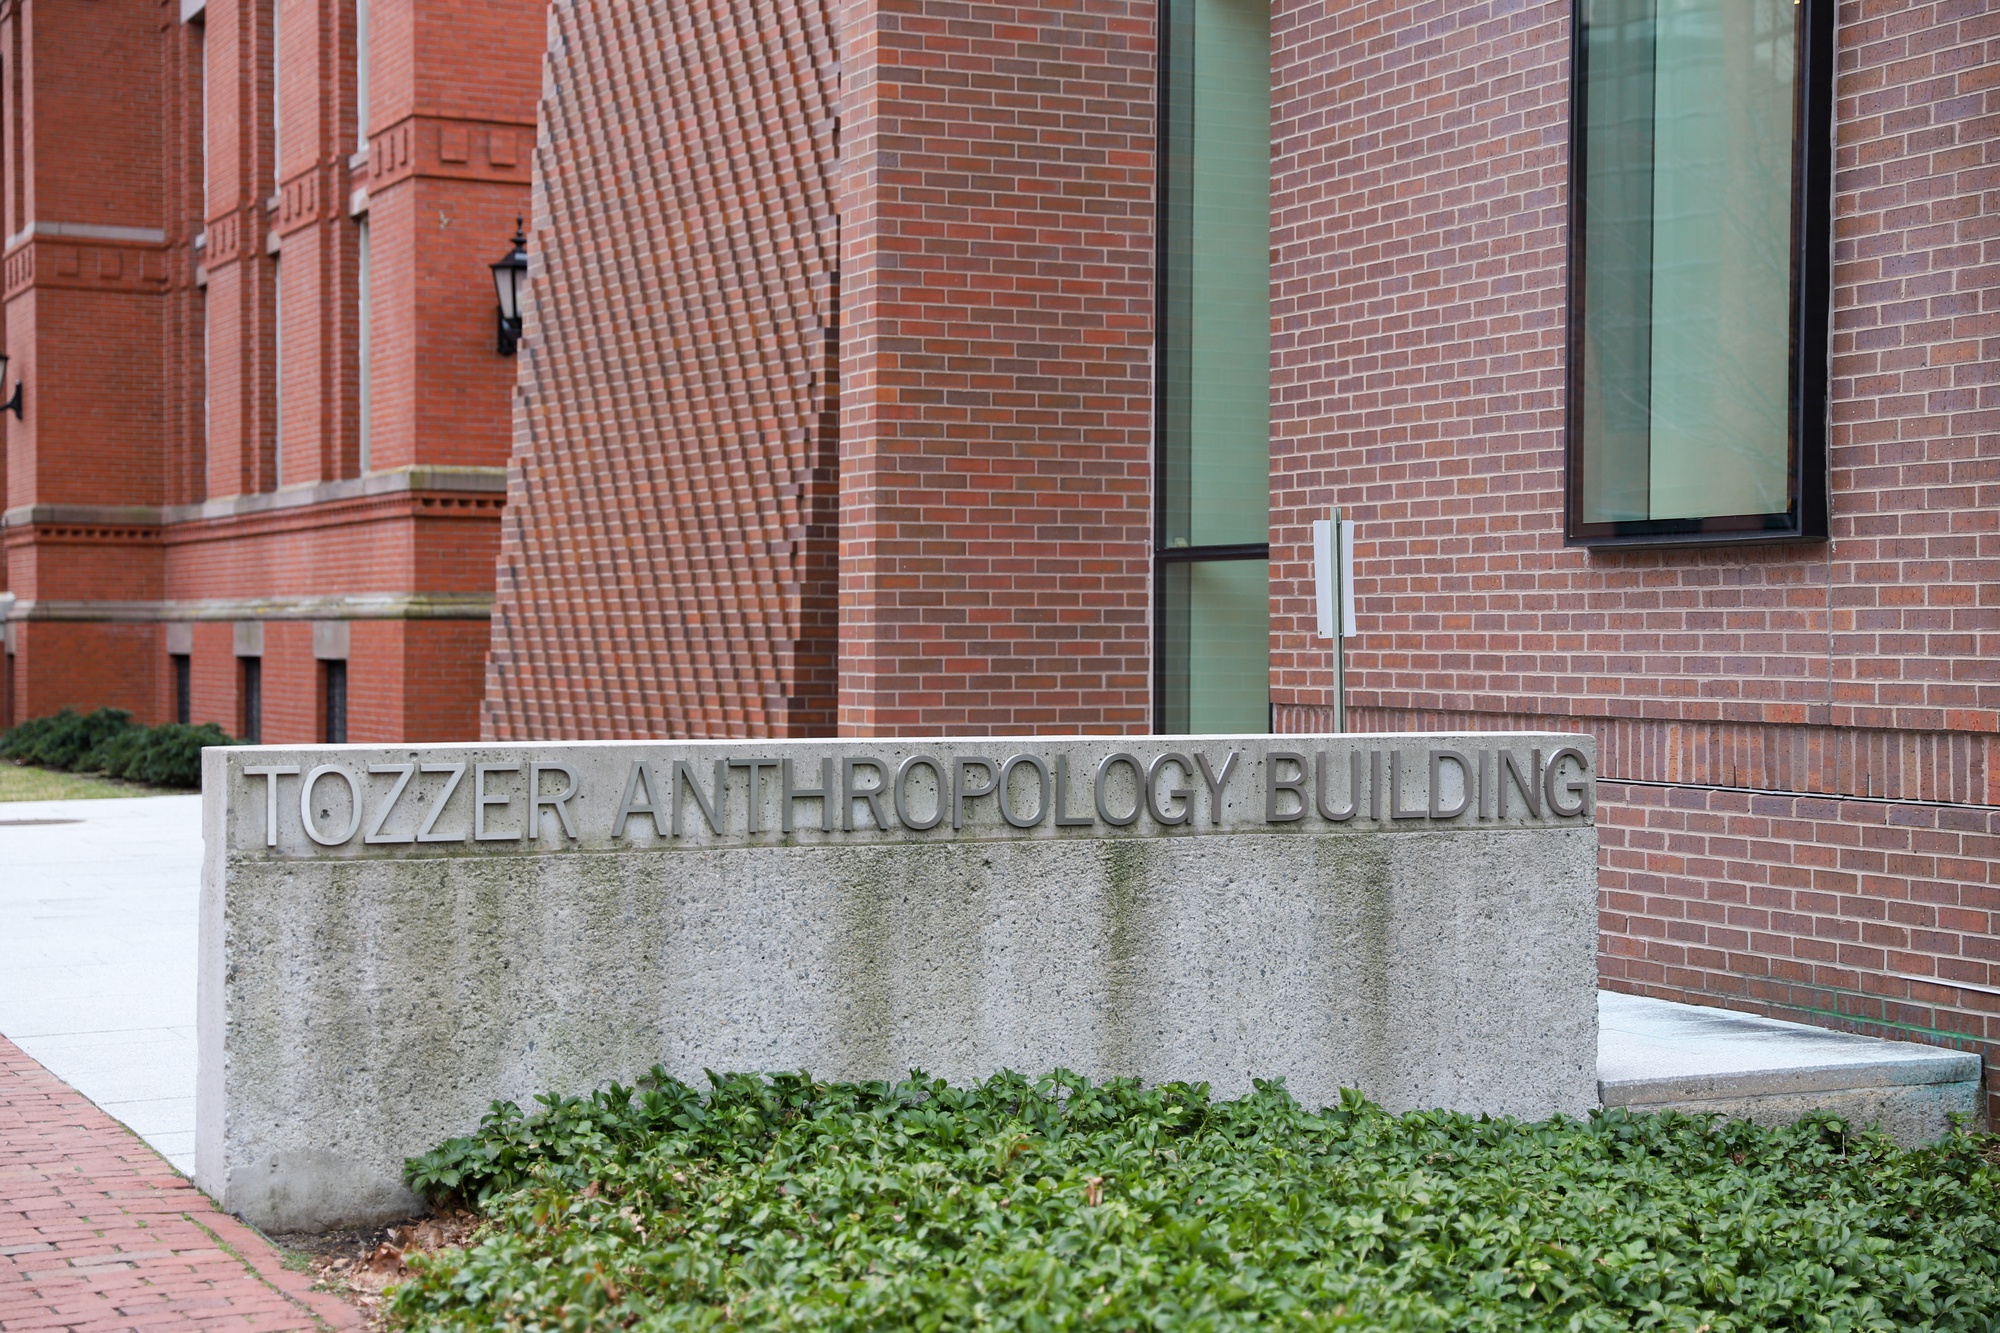 The Tozzer Anthropology Building and Peabody Museum house offices for Harvard's Anthropology department.